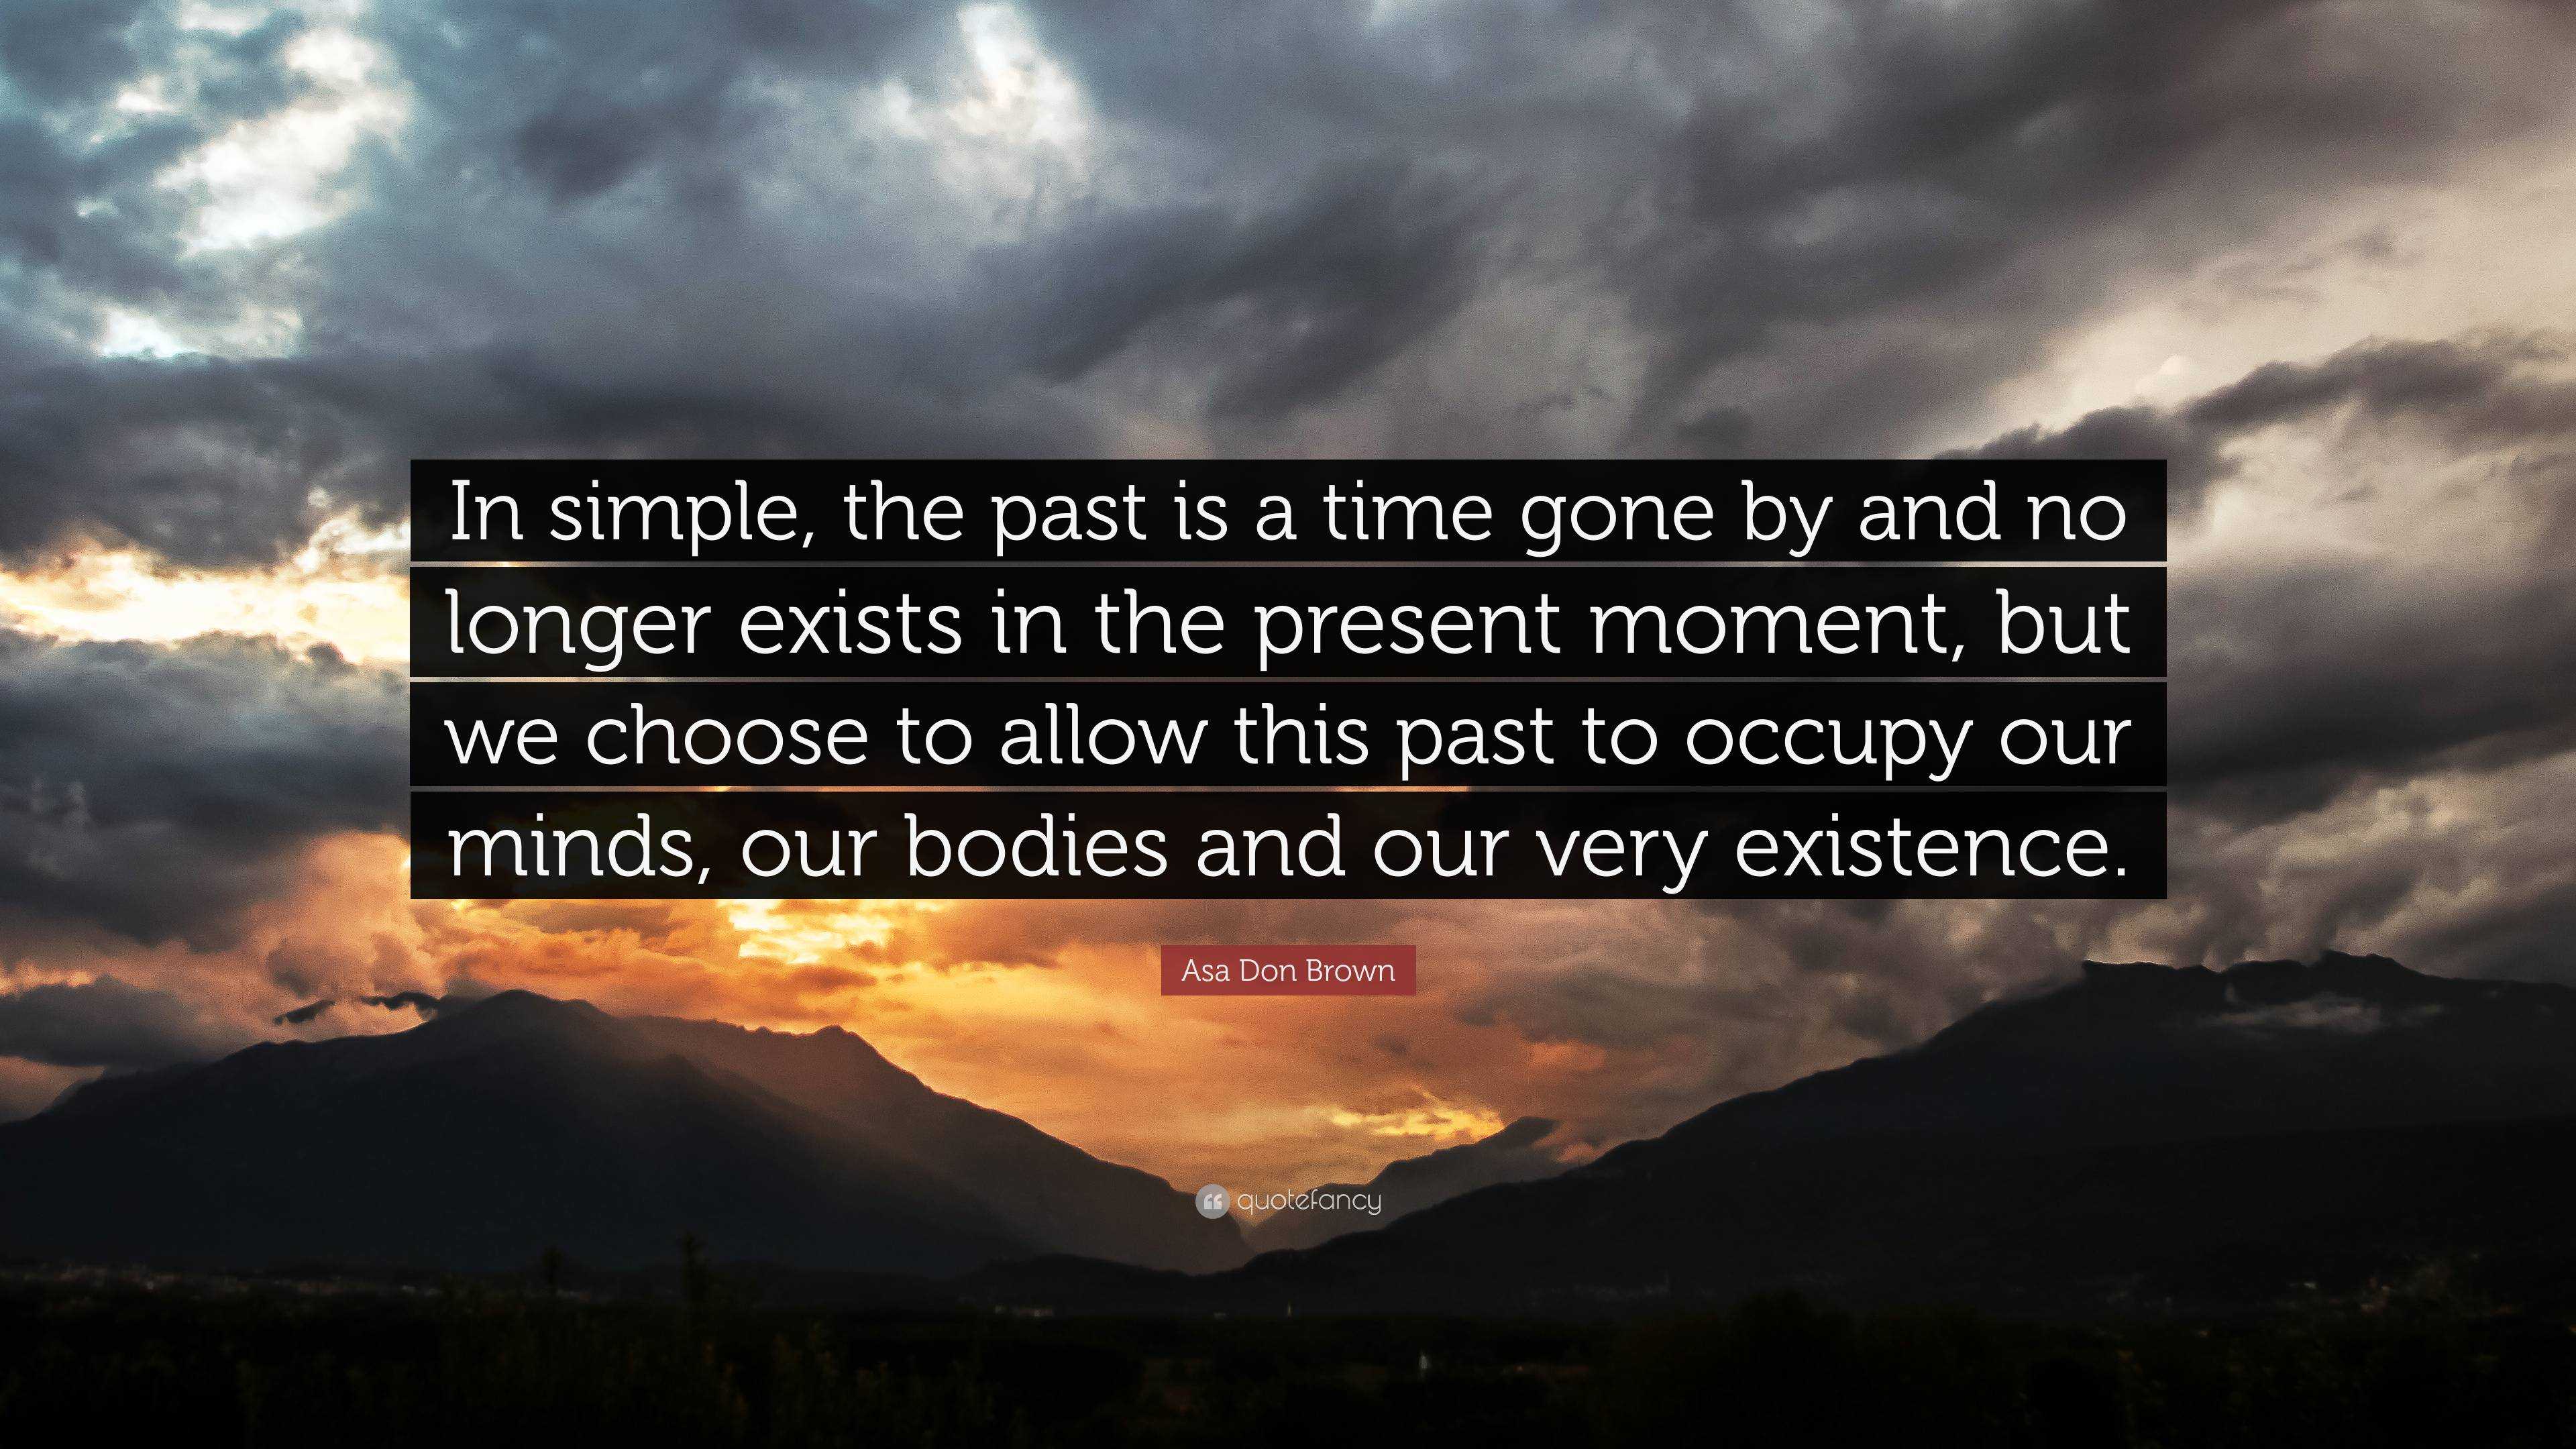 Asa Don Brown Quote: “In simple, the past is a time gone by and no ...